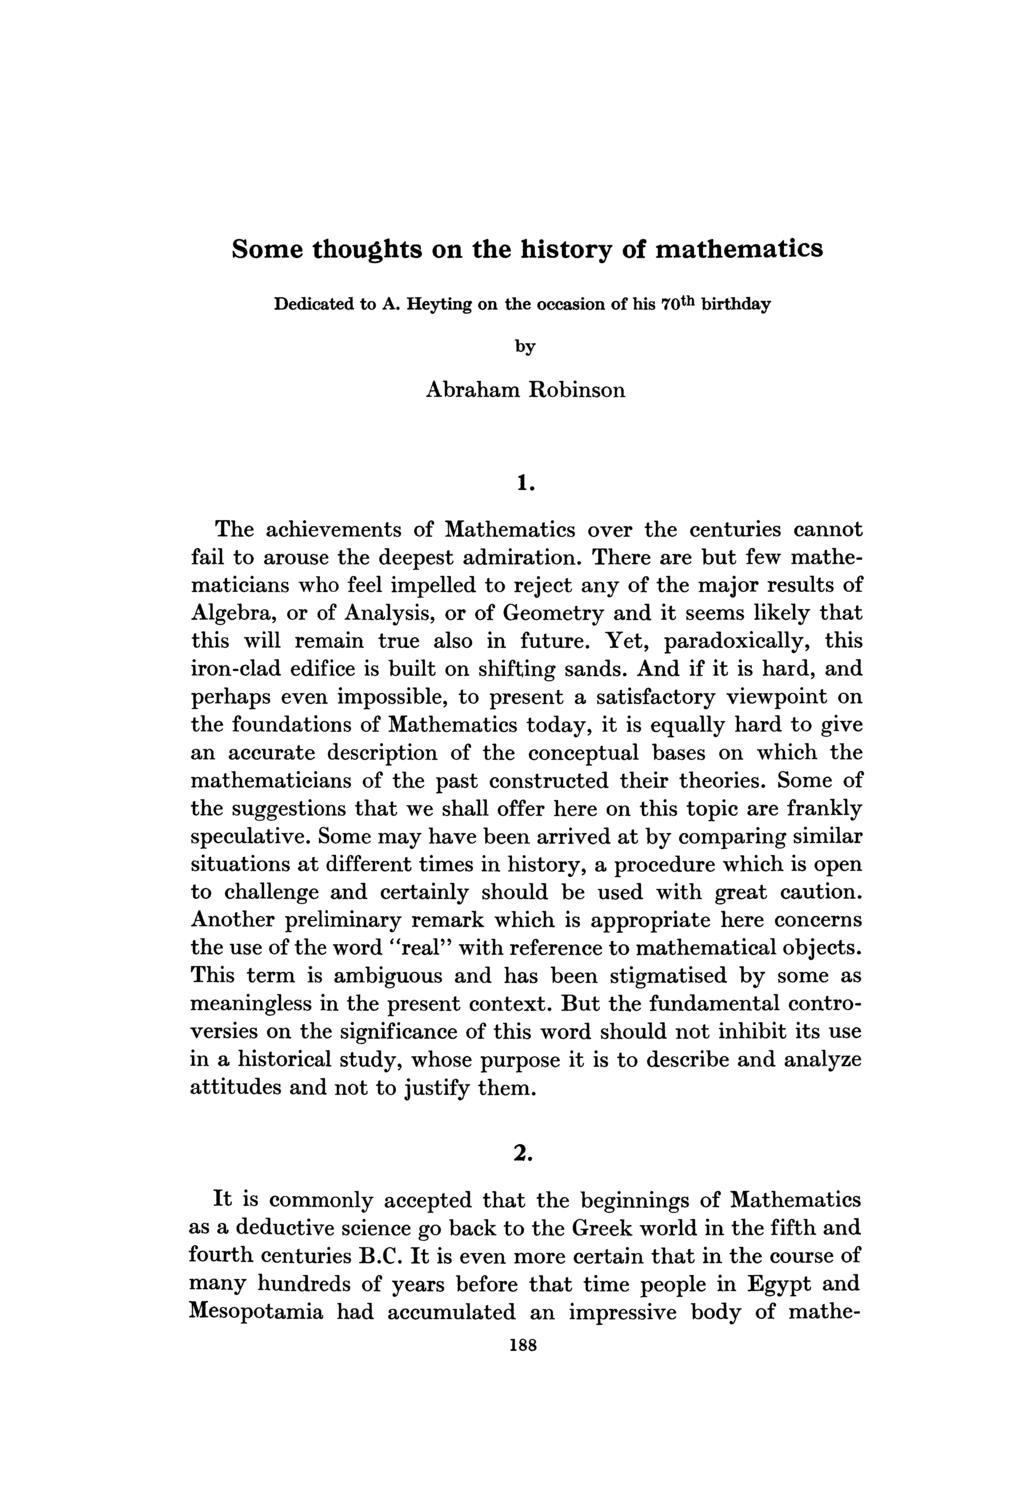 Some thoughts on the history of mathematics Dedicated to A. Heyting on the occasion of his 70th birthday by Abraham Robinson 1. The achievements of Mathematics over the centuries cannot admiration.